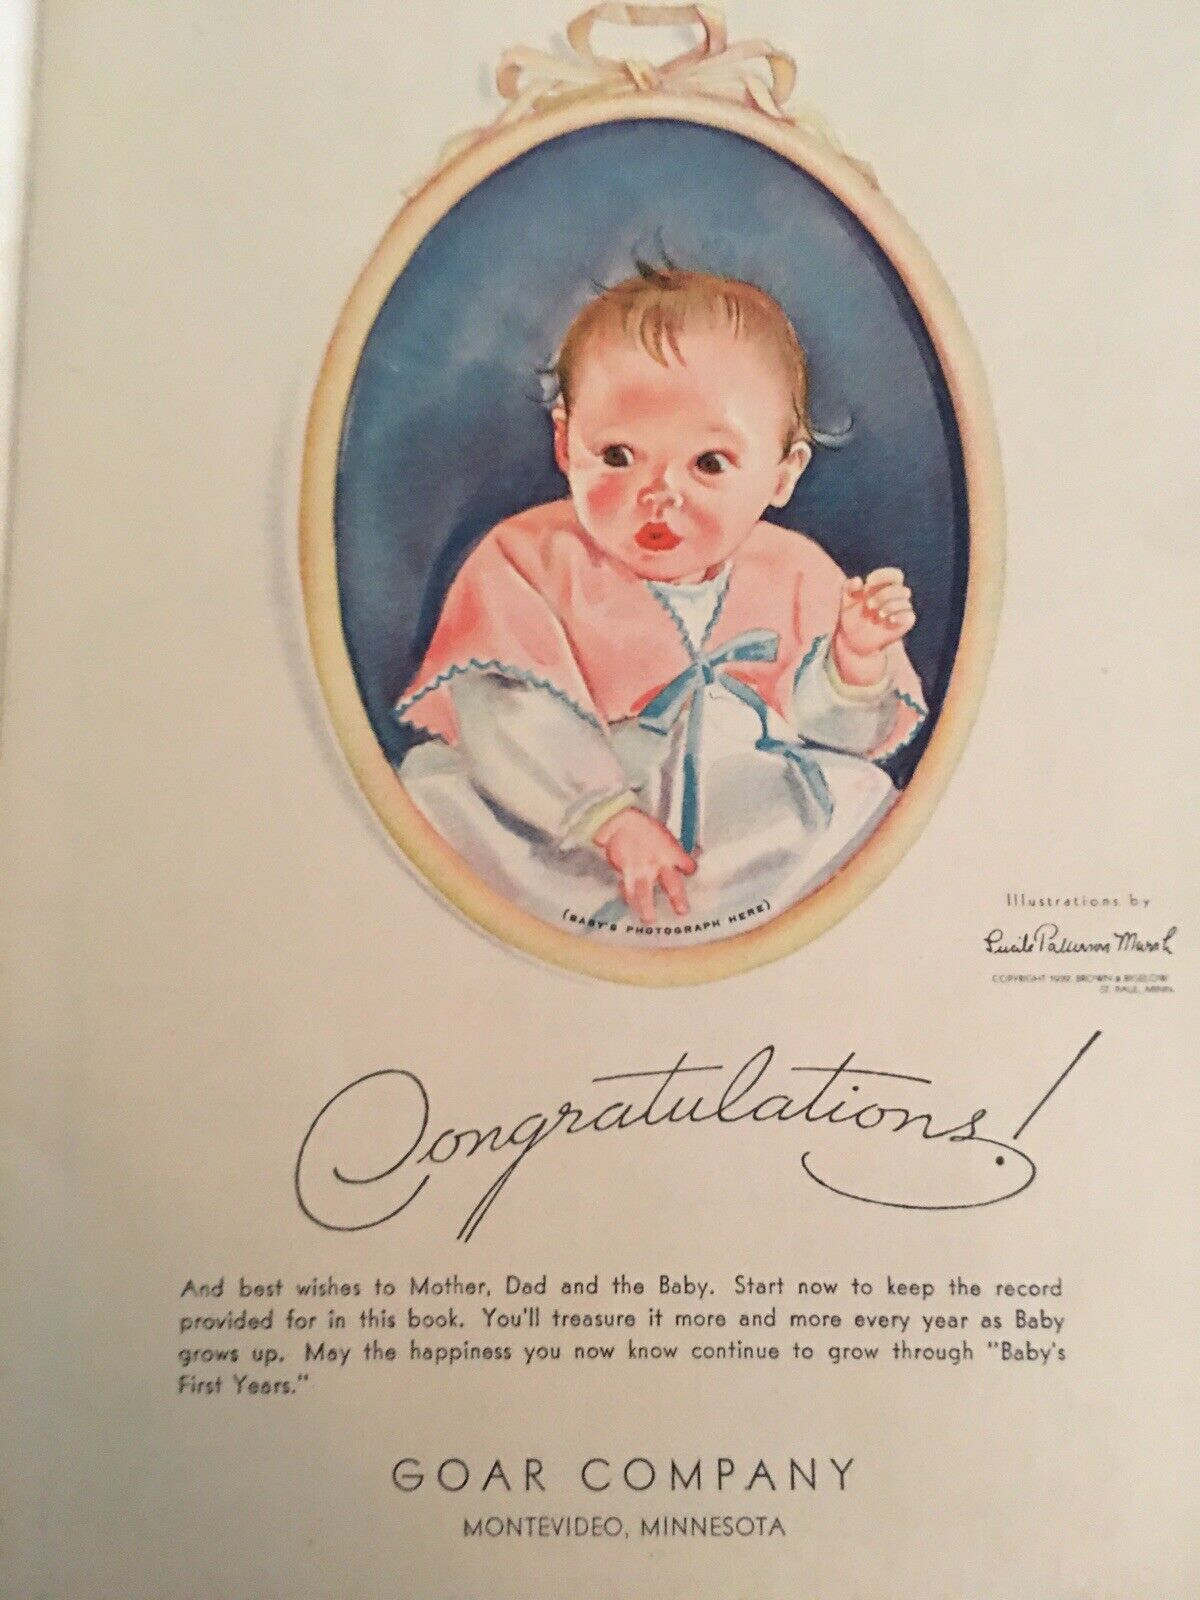 RARE 1939 Baby’s First Years Book NOS ILLUSTRATED by Lucile Marsh